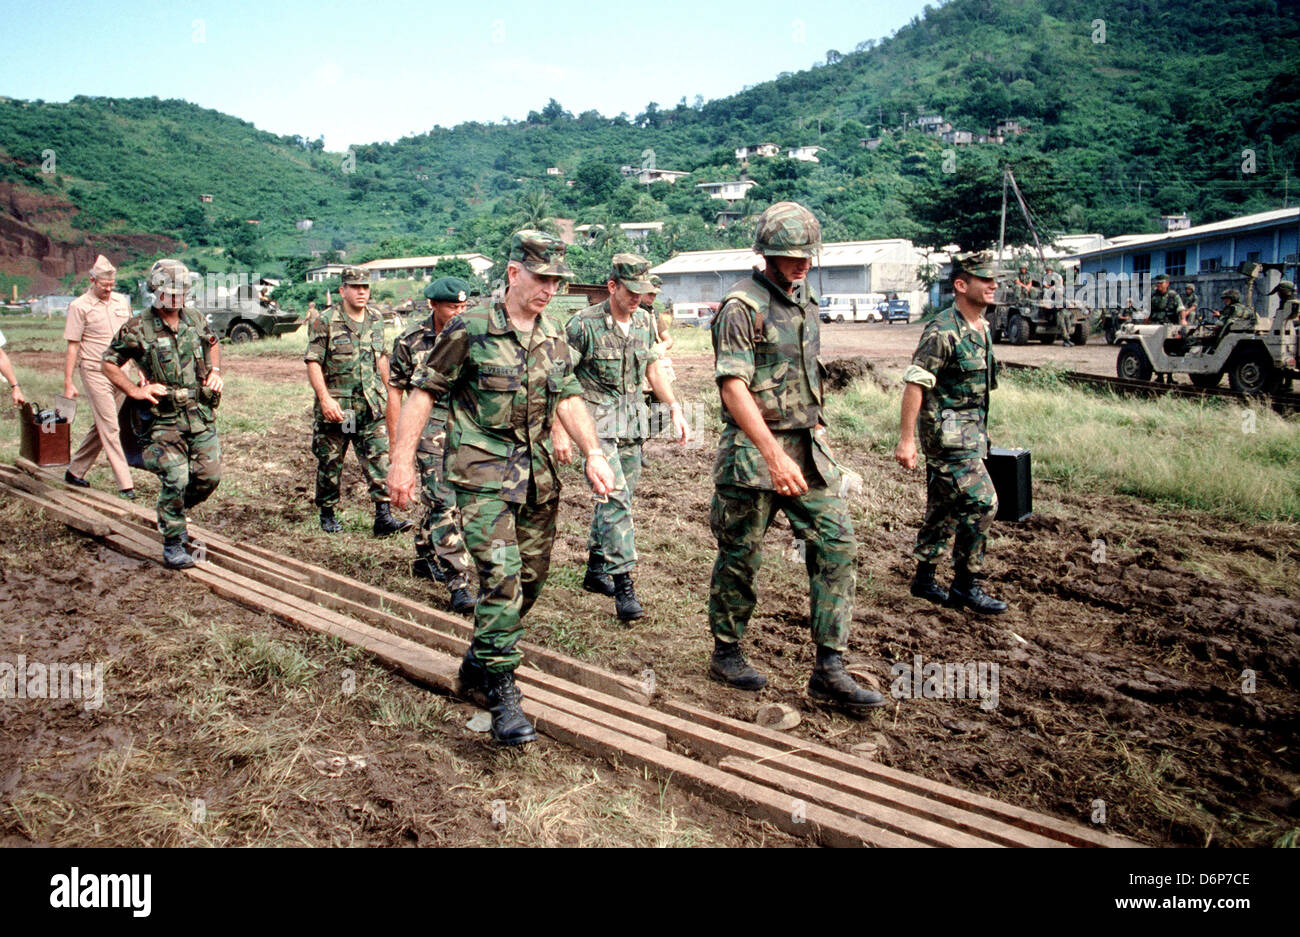 US Chairman of the Joint Chiefs of Staff, General John W. Vessey Jr. tours the battlefield during the Invasion of Grenada, codenamed Operation Urgent Fury November 4, 1983 in St Georges, Grenada. The invasion began on October 25, 1983 and was the first major military action by the United States since the end of the Vietnam War. Stock Photo